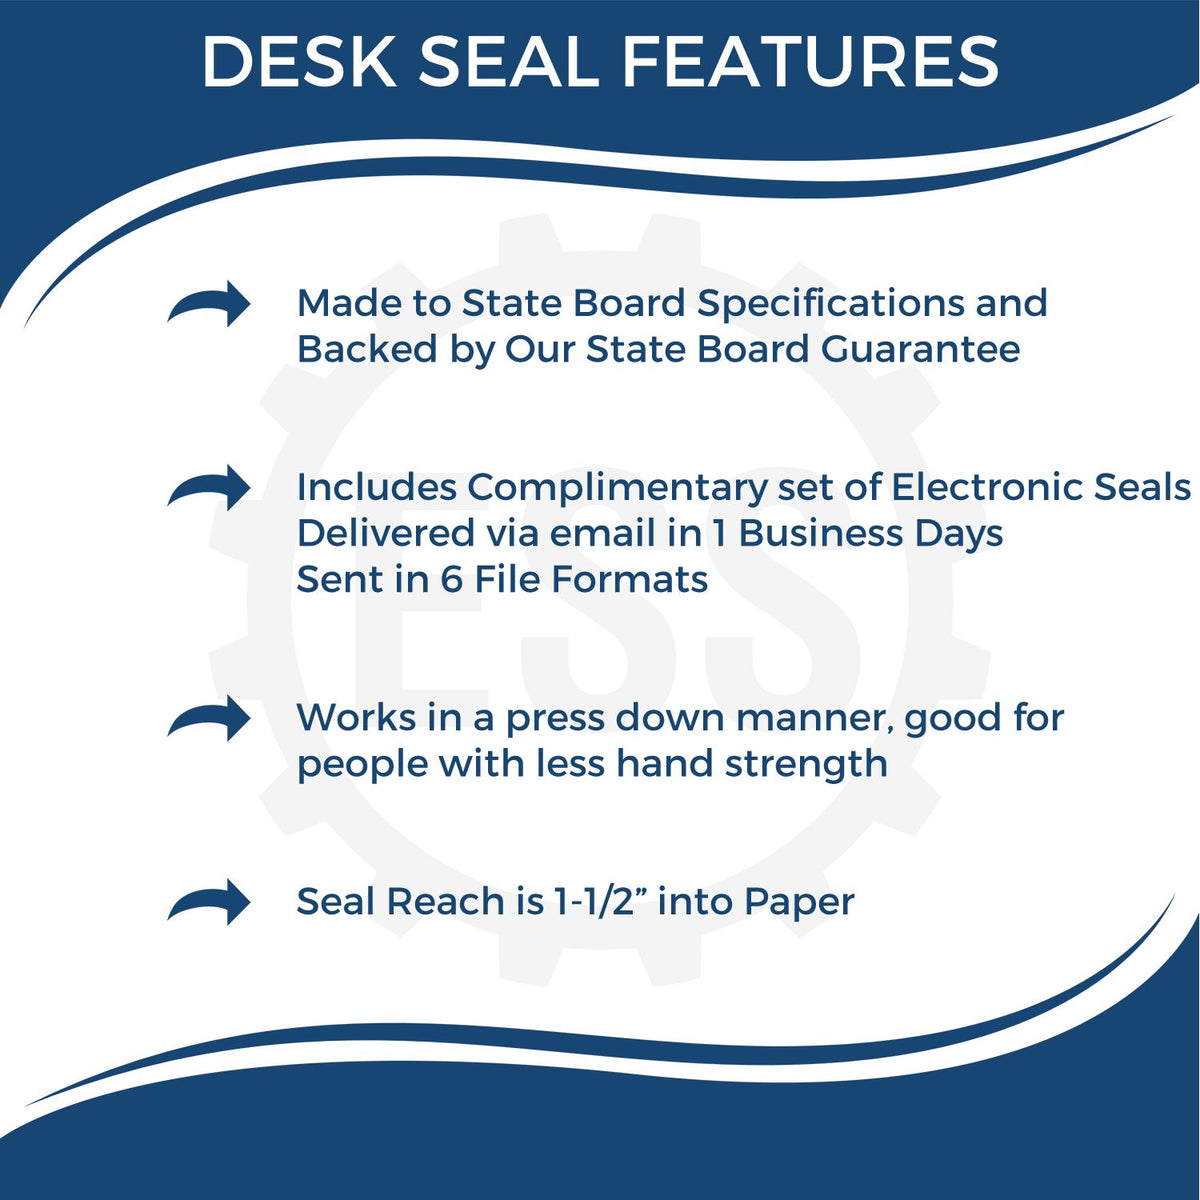 A picture of an infographic highlighting the selling points for the Maine Desk Surveyor Seal Embosser